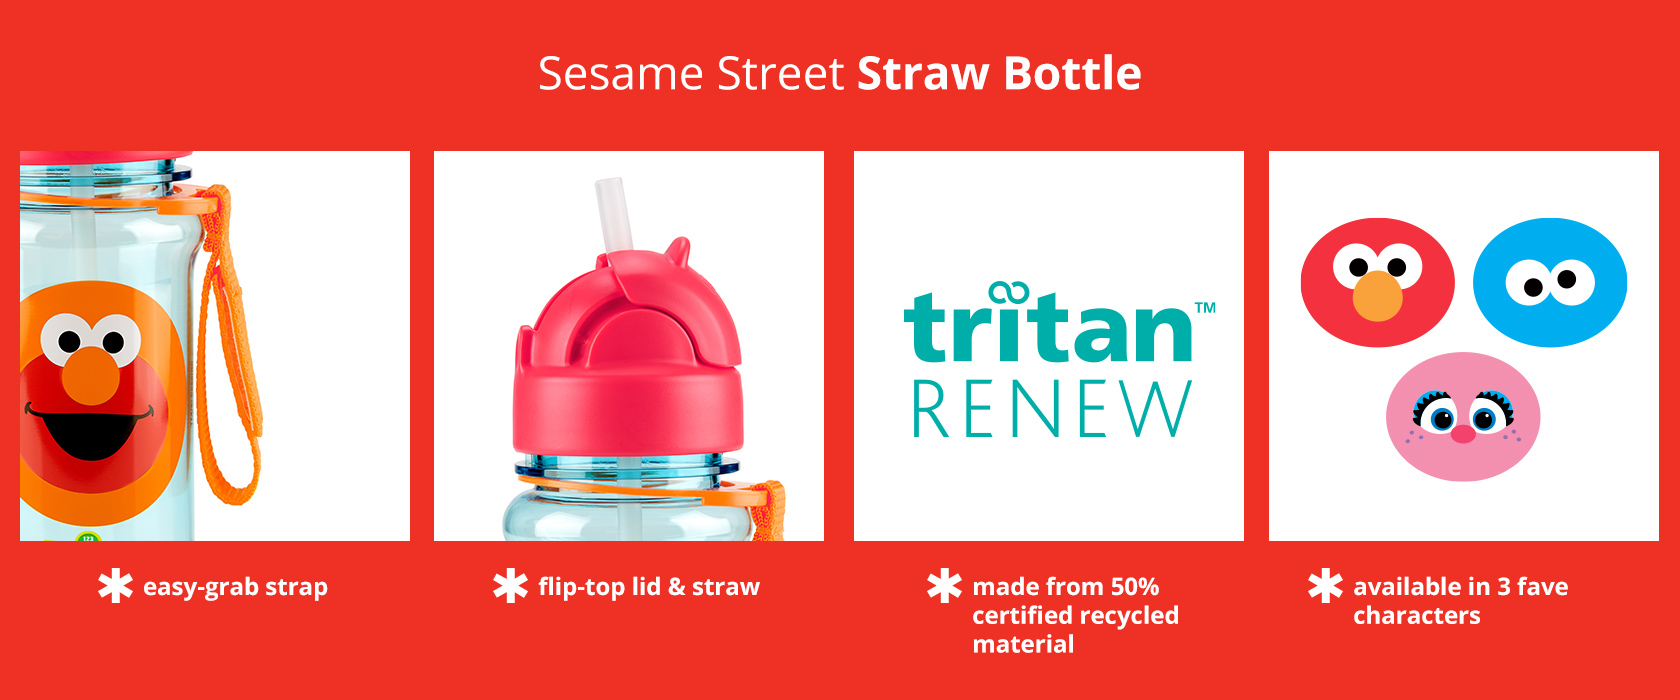 Skip Hop x Sesame Street Straw Bottle has an easy-grab strap, flip-top lid & straw, and is made
from 50% certified recycled material. Available in 3 characters.